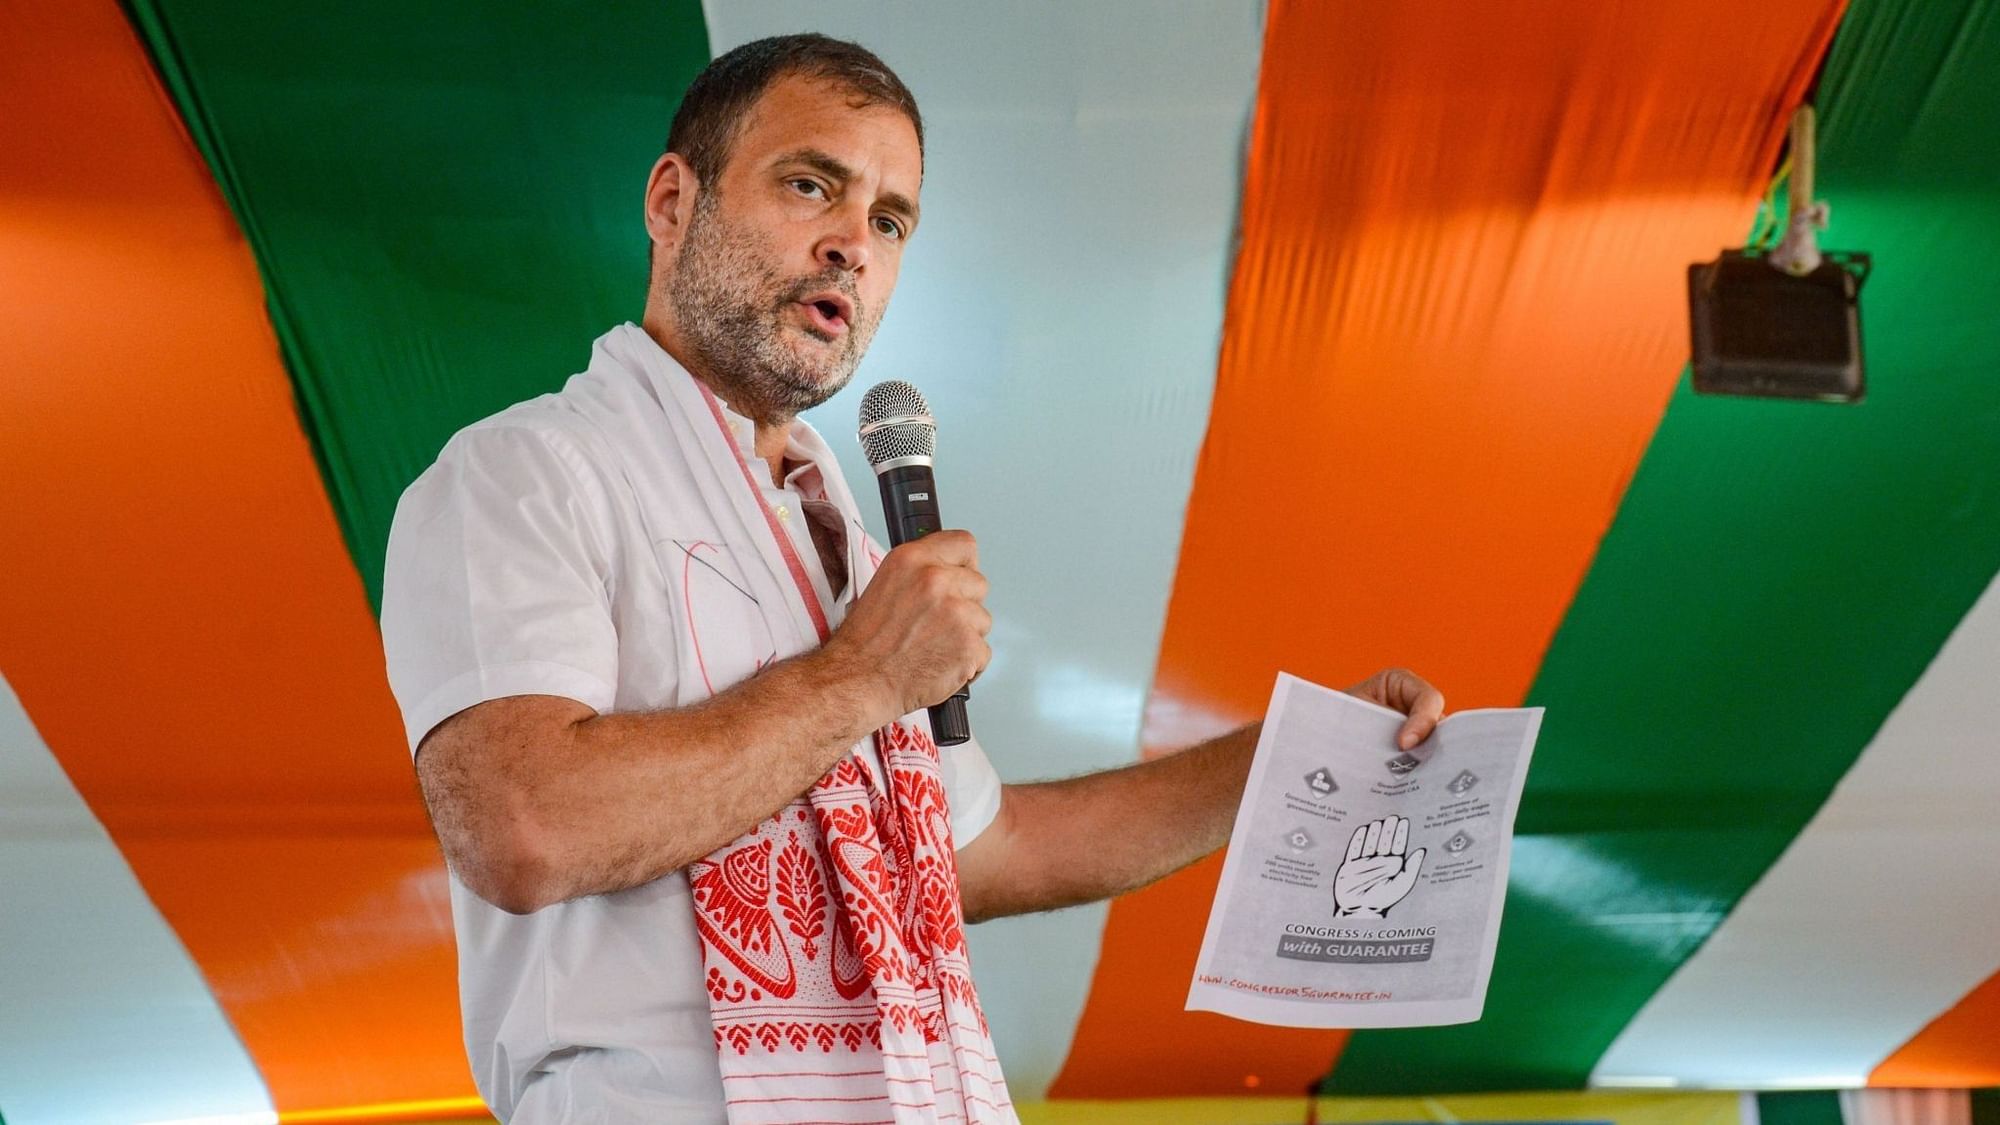 Congress leader Rahul Gandhi tweeted a campaign video on Tuesday, March 30, for the ongoing Assam assembly elections.